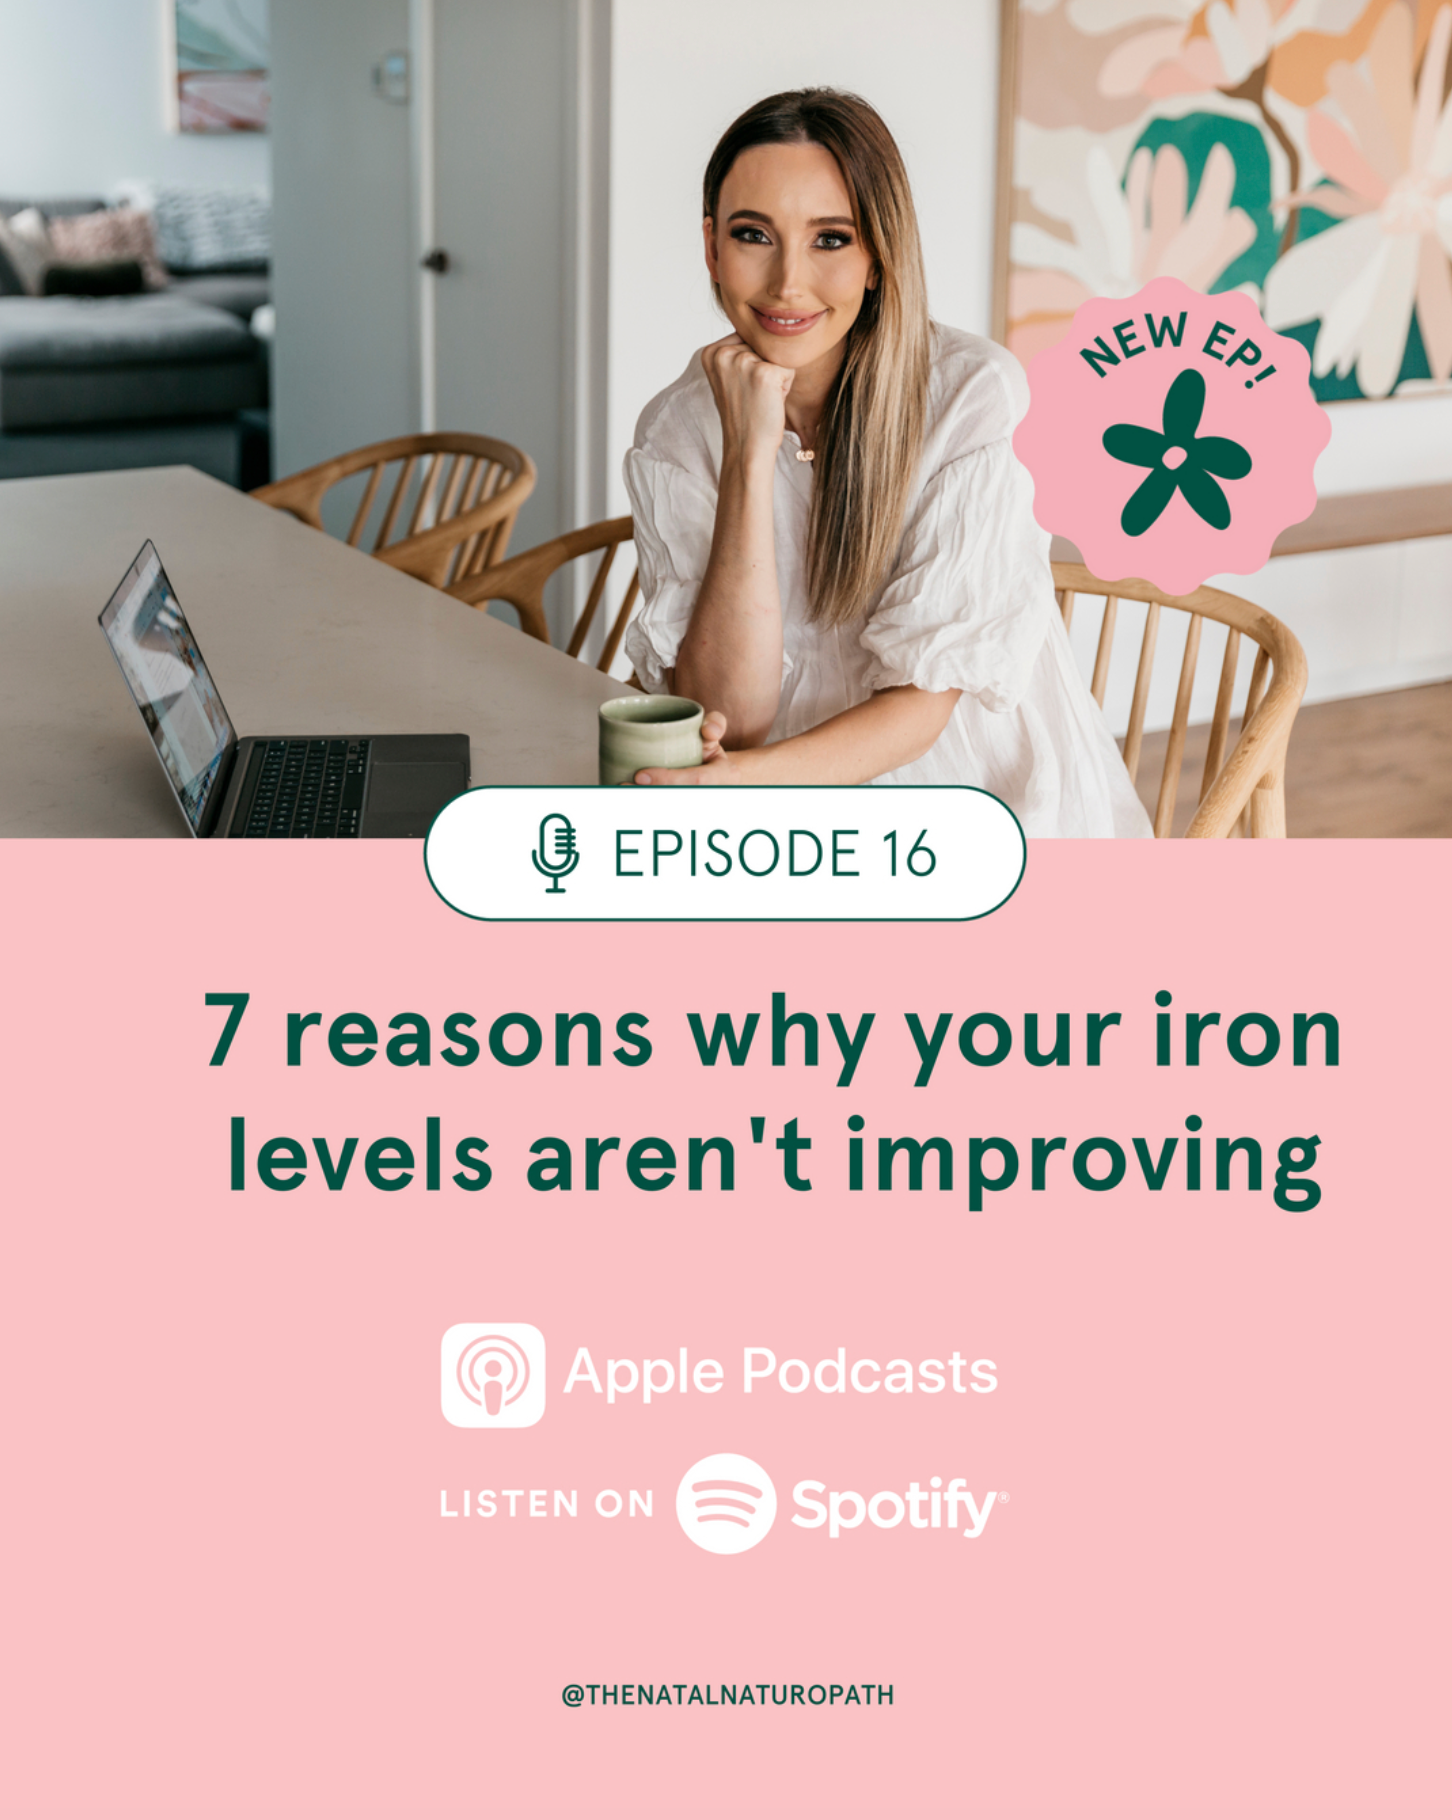 7 reasons why your iron levels aren't improving